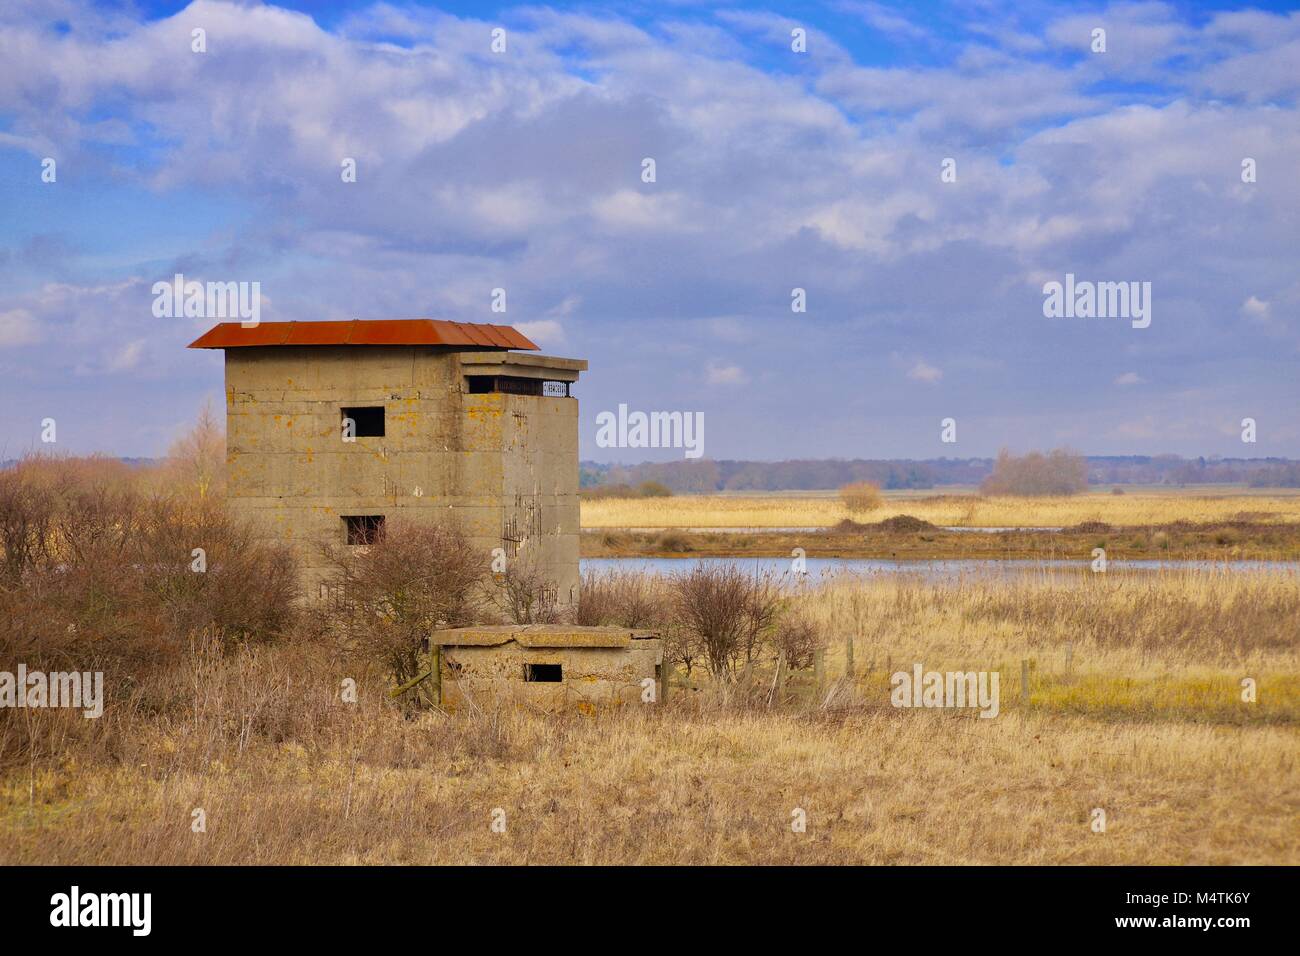 Historic WW2 gun placement / lookout tower at East Lane, Bawdsey, Suffolk. Stock Photo